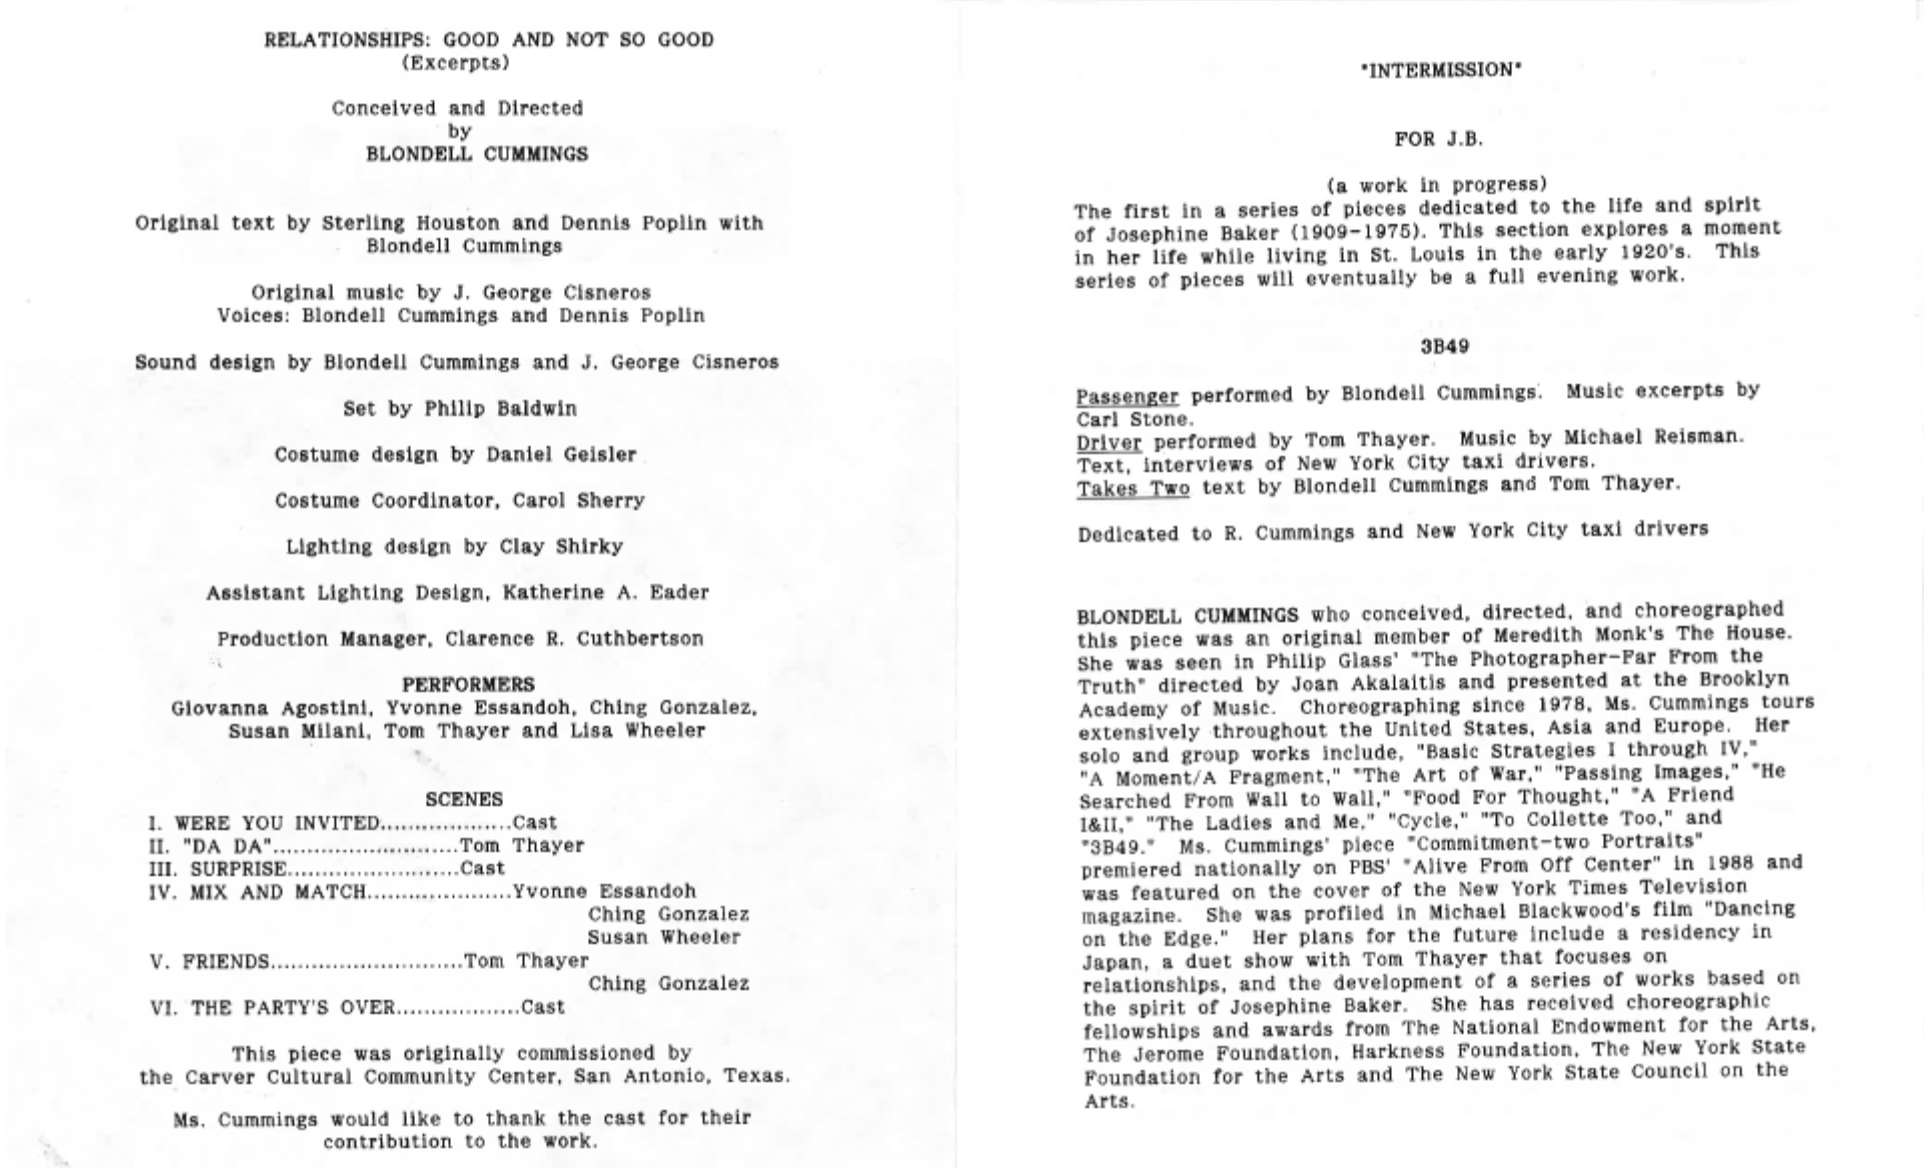 Excerpts from program for Blondell Cummings, Relationships: Good and Not So Good, For J.B., and 3B49 at The Kitchen, November 30–December 3, 1989, with names of Cummings’s family members highlighted in yellow in the “Thanks to” section. Emphasis added.